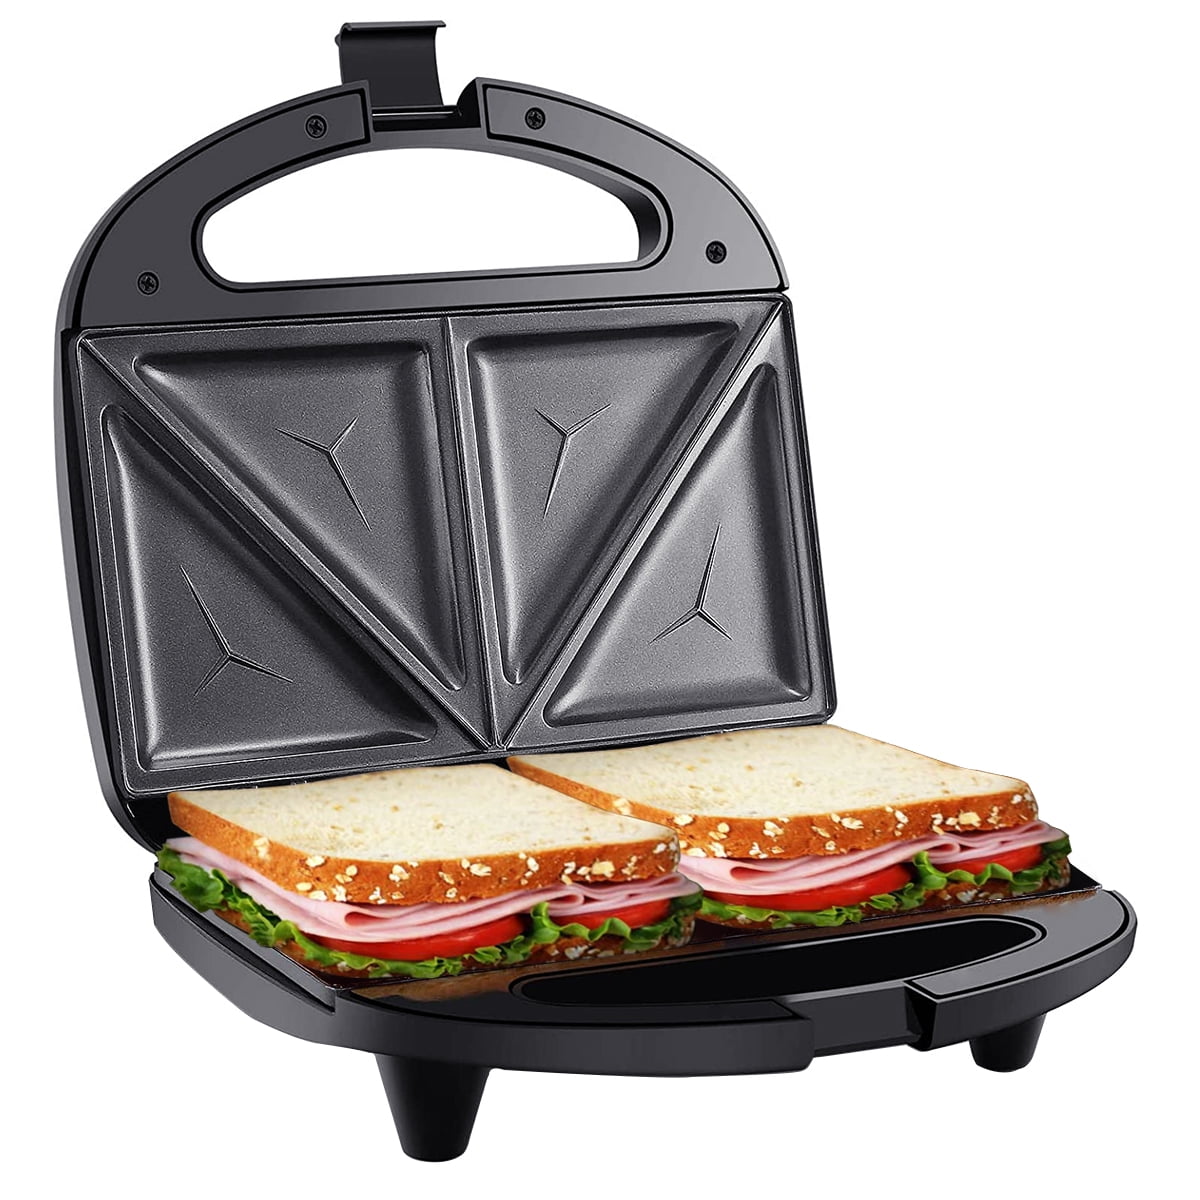 Tiastar Electric Sandwich/Grill, 750W Panini Maker, Toaster with